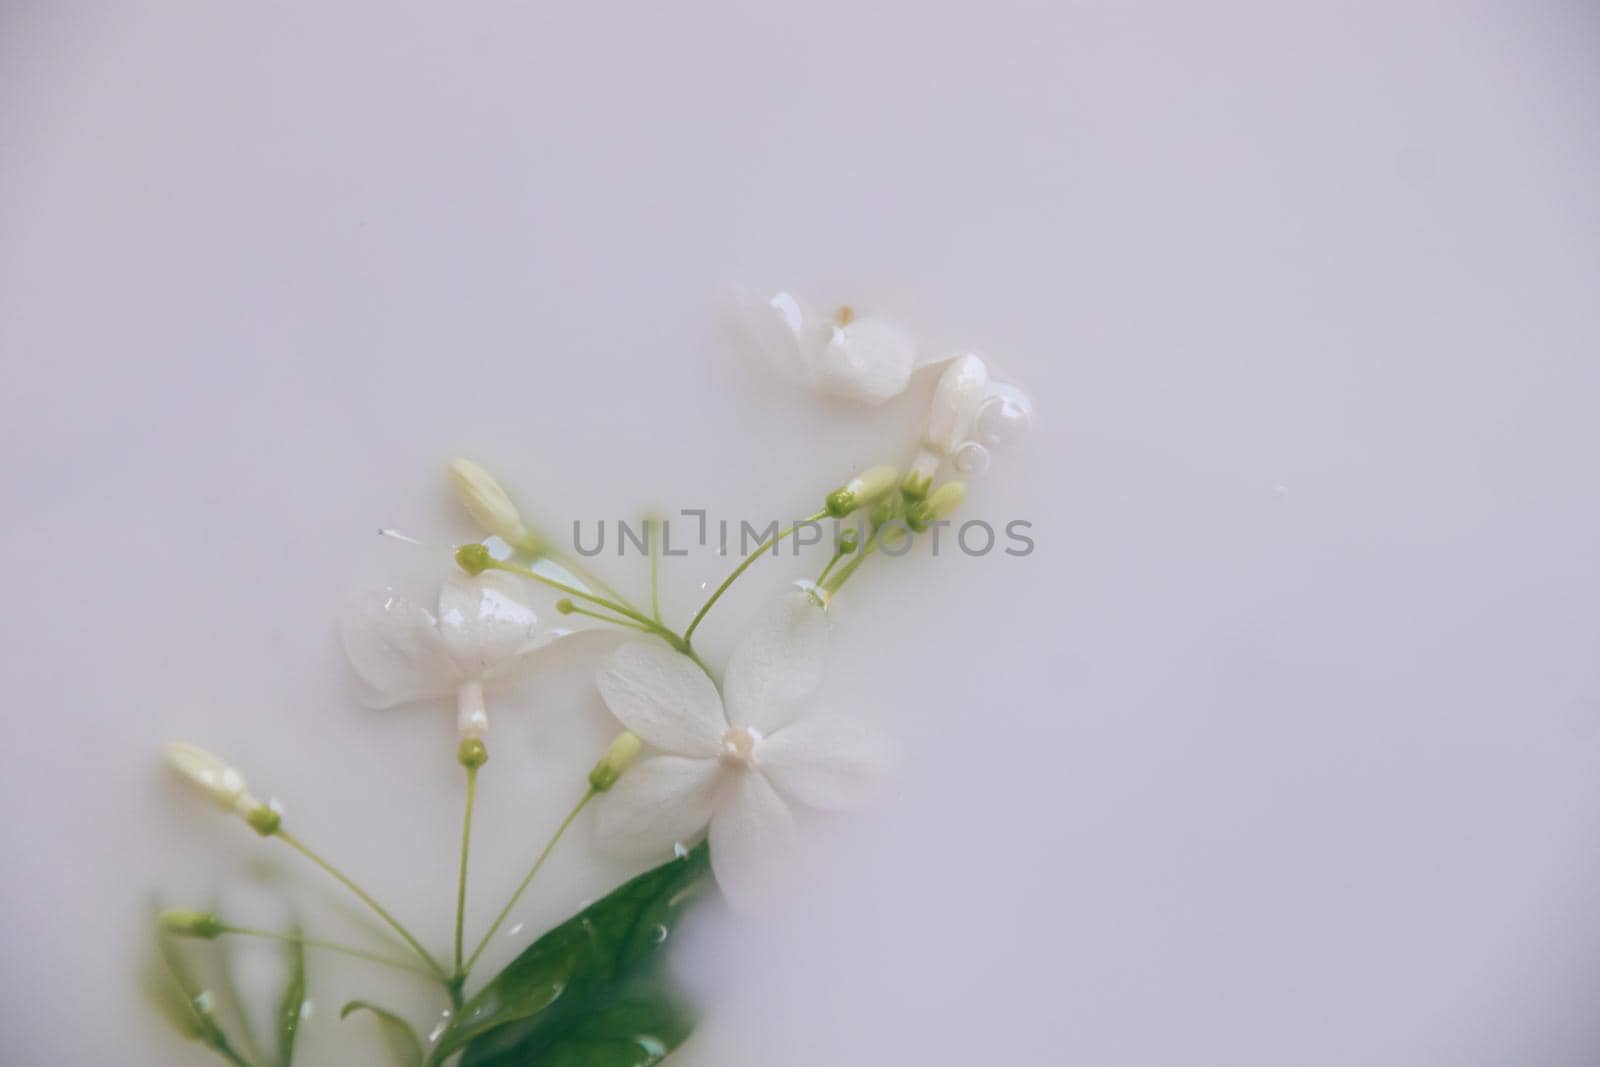 Delicate white flowers in a therapeutic milk bath by Sonnet15